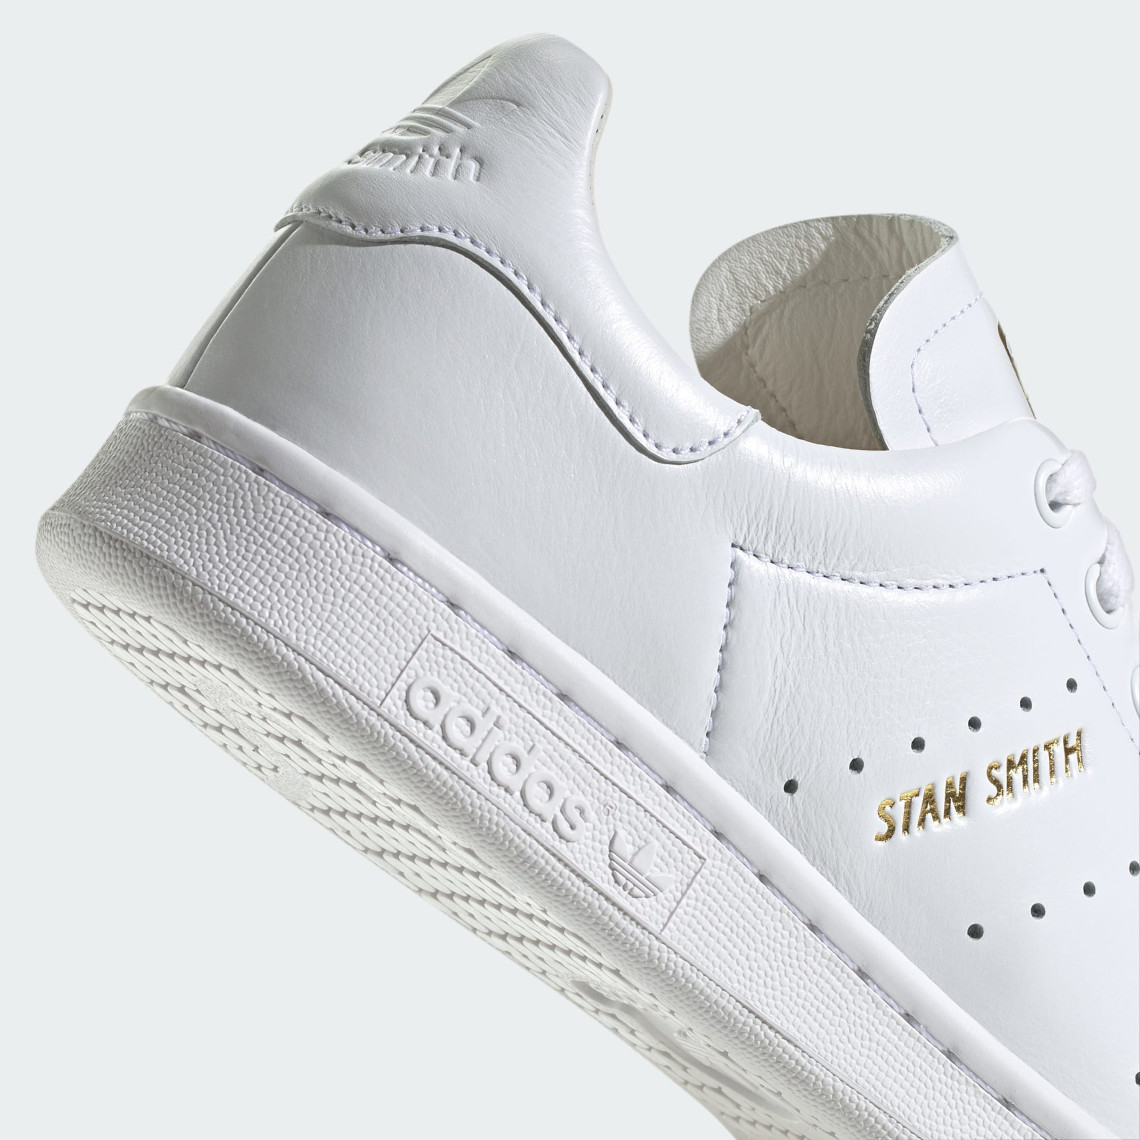 The Limited Edition Adidas Stan Smith Lux Is Coming To America - Maxim